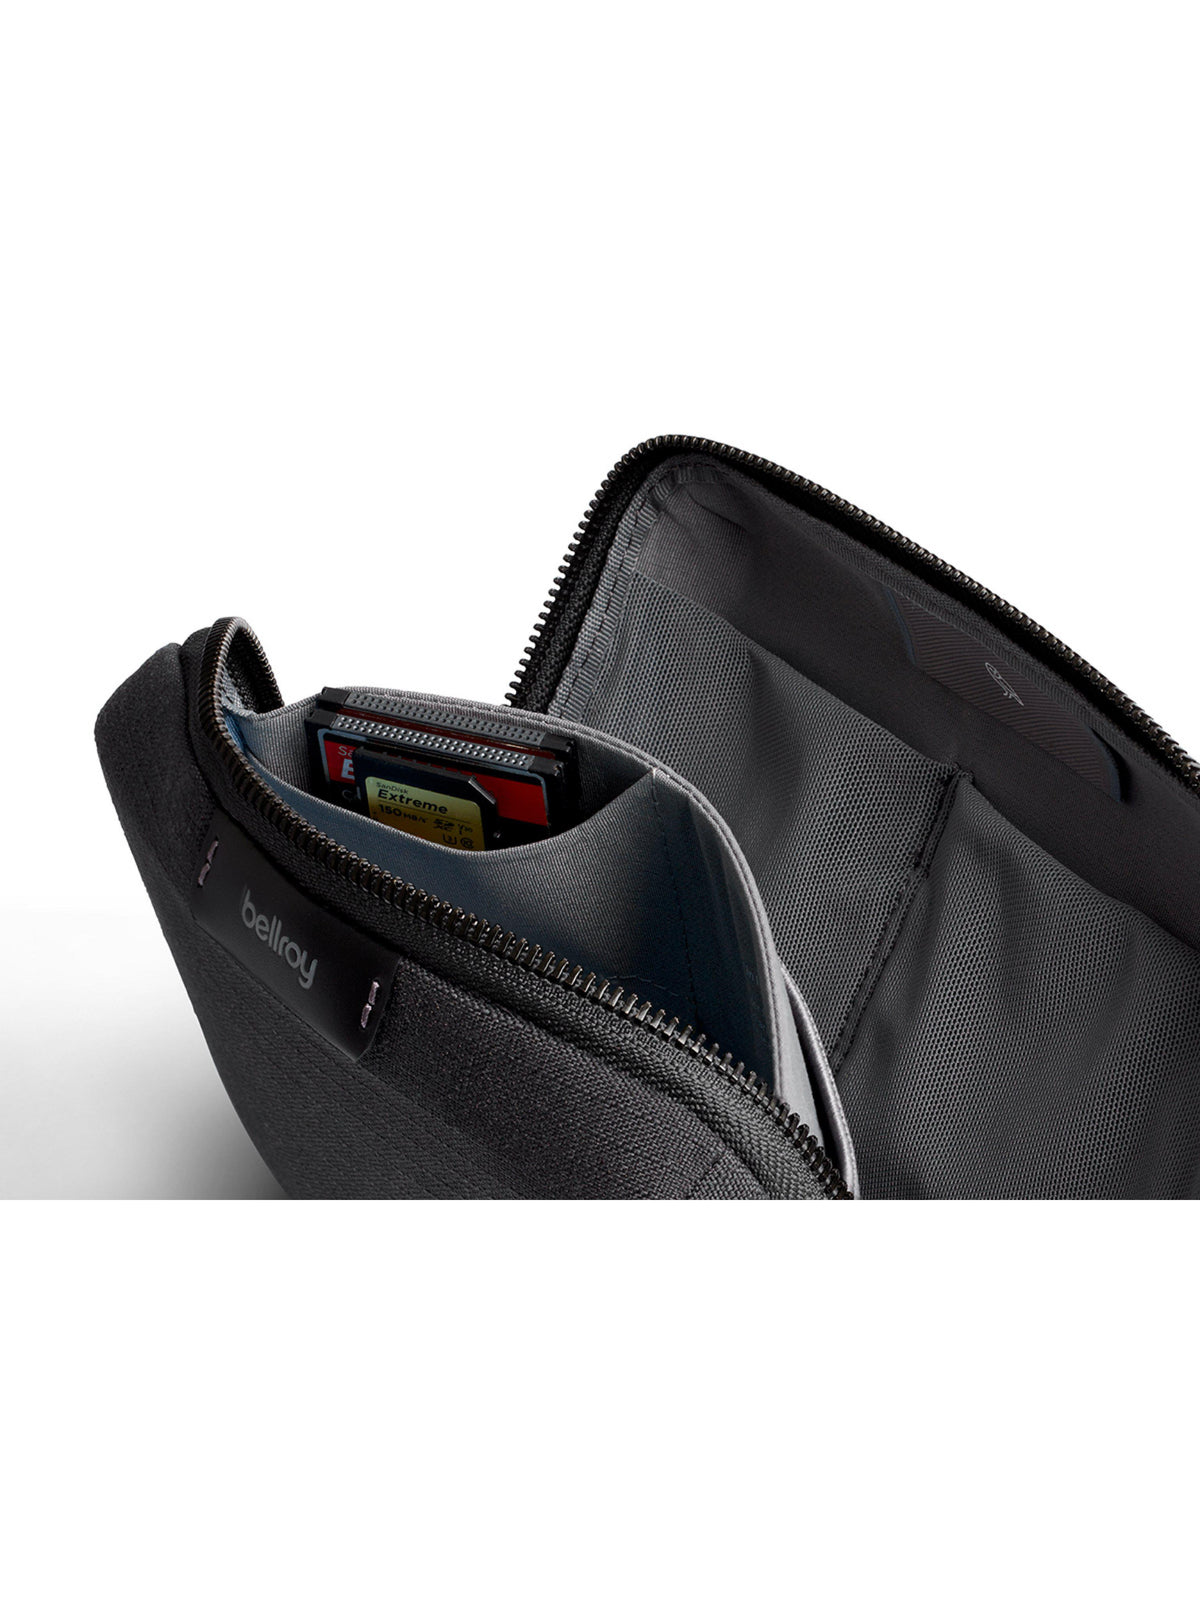 Bellroy Tech Kit Compact Midnight Recycled